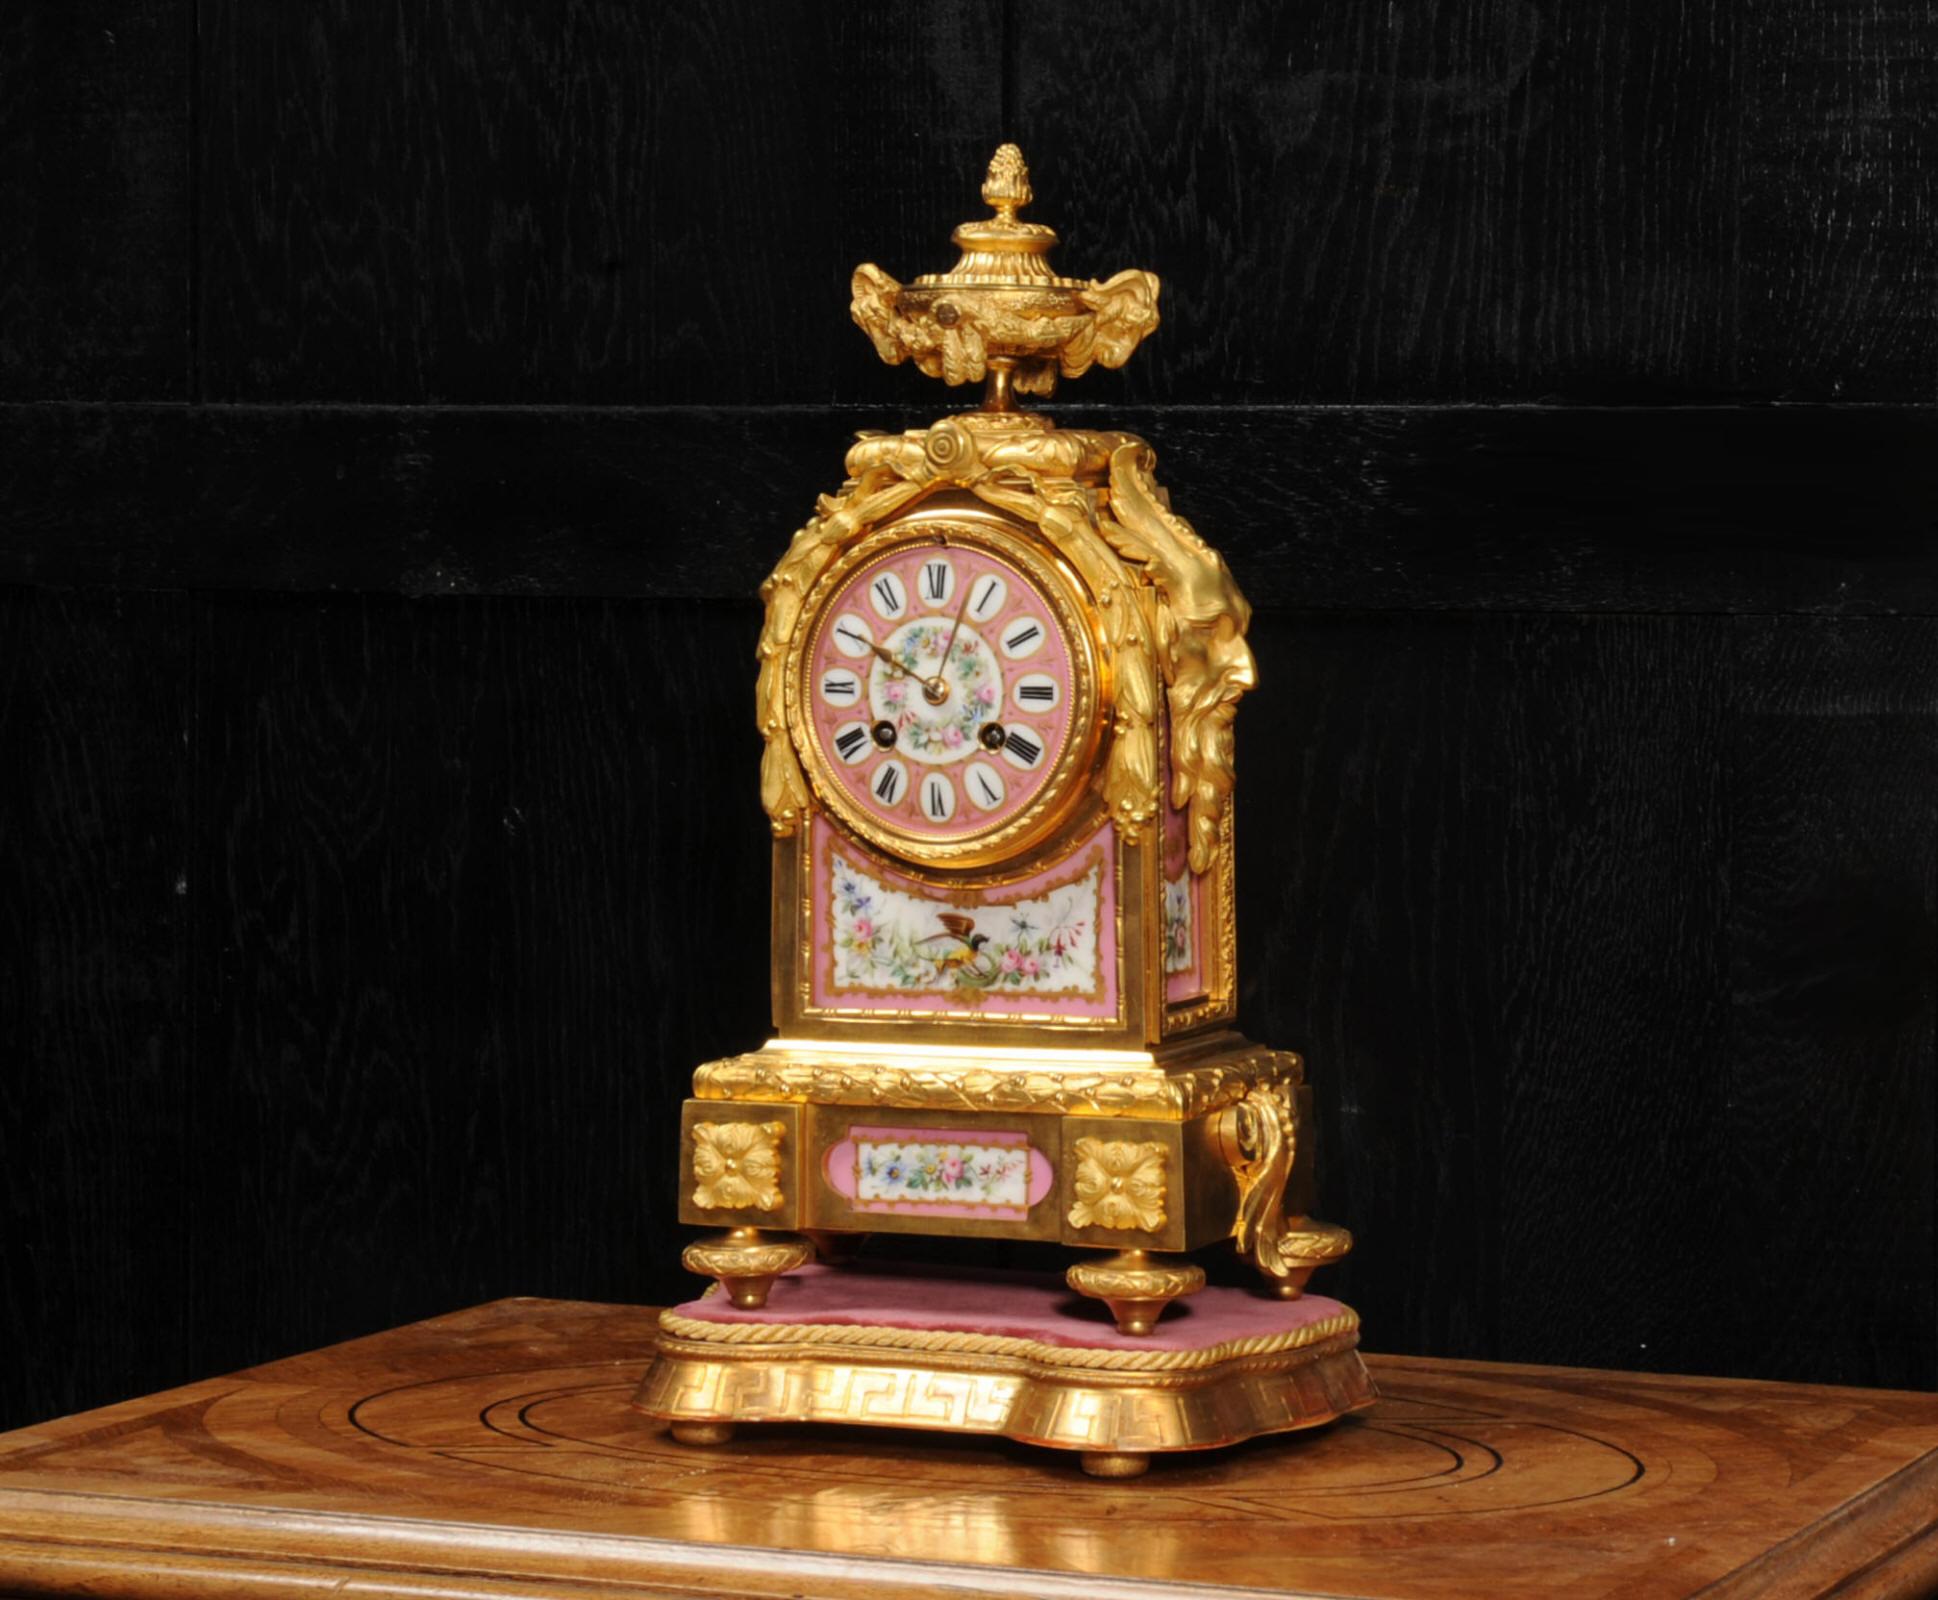 A beautiful ormolu clock, mounted with exquisite panels of Sèvres style porcelain with a pompadour rose ground. Each piece is finely decorated, flowers, an exotic bird and a dragon fly. It is by Japy Frères and was retailed by the well-known London